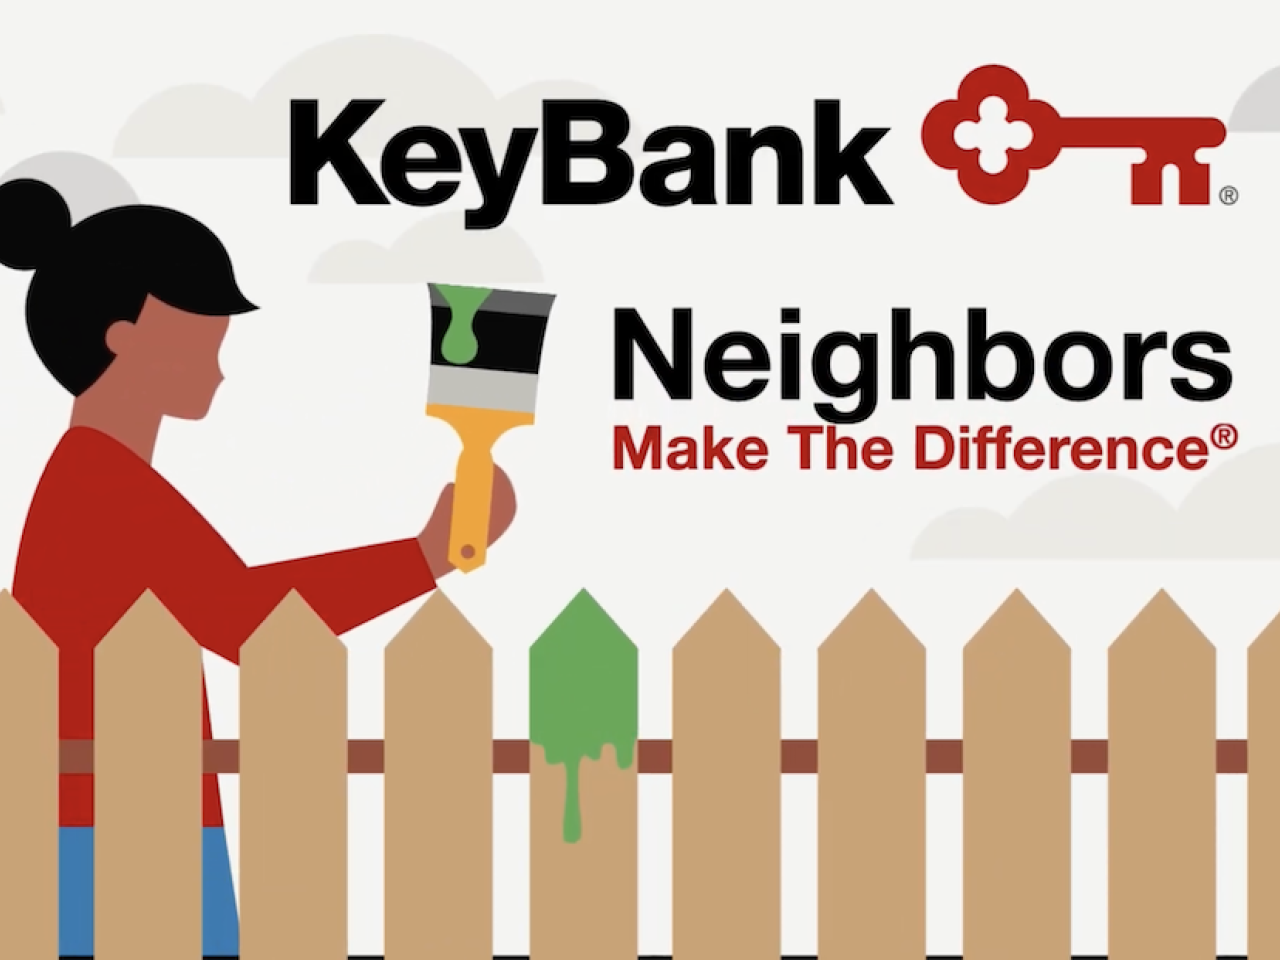 KeyBank Neighbors Make The Difference.